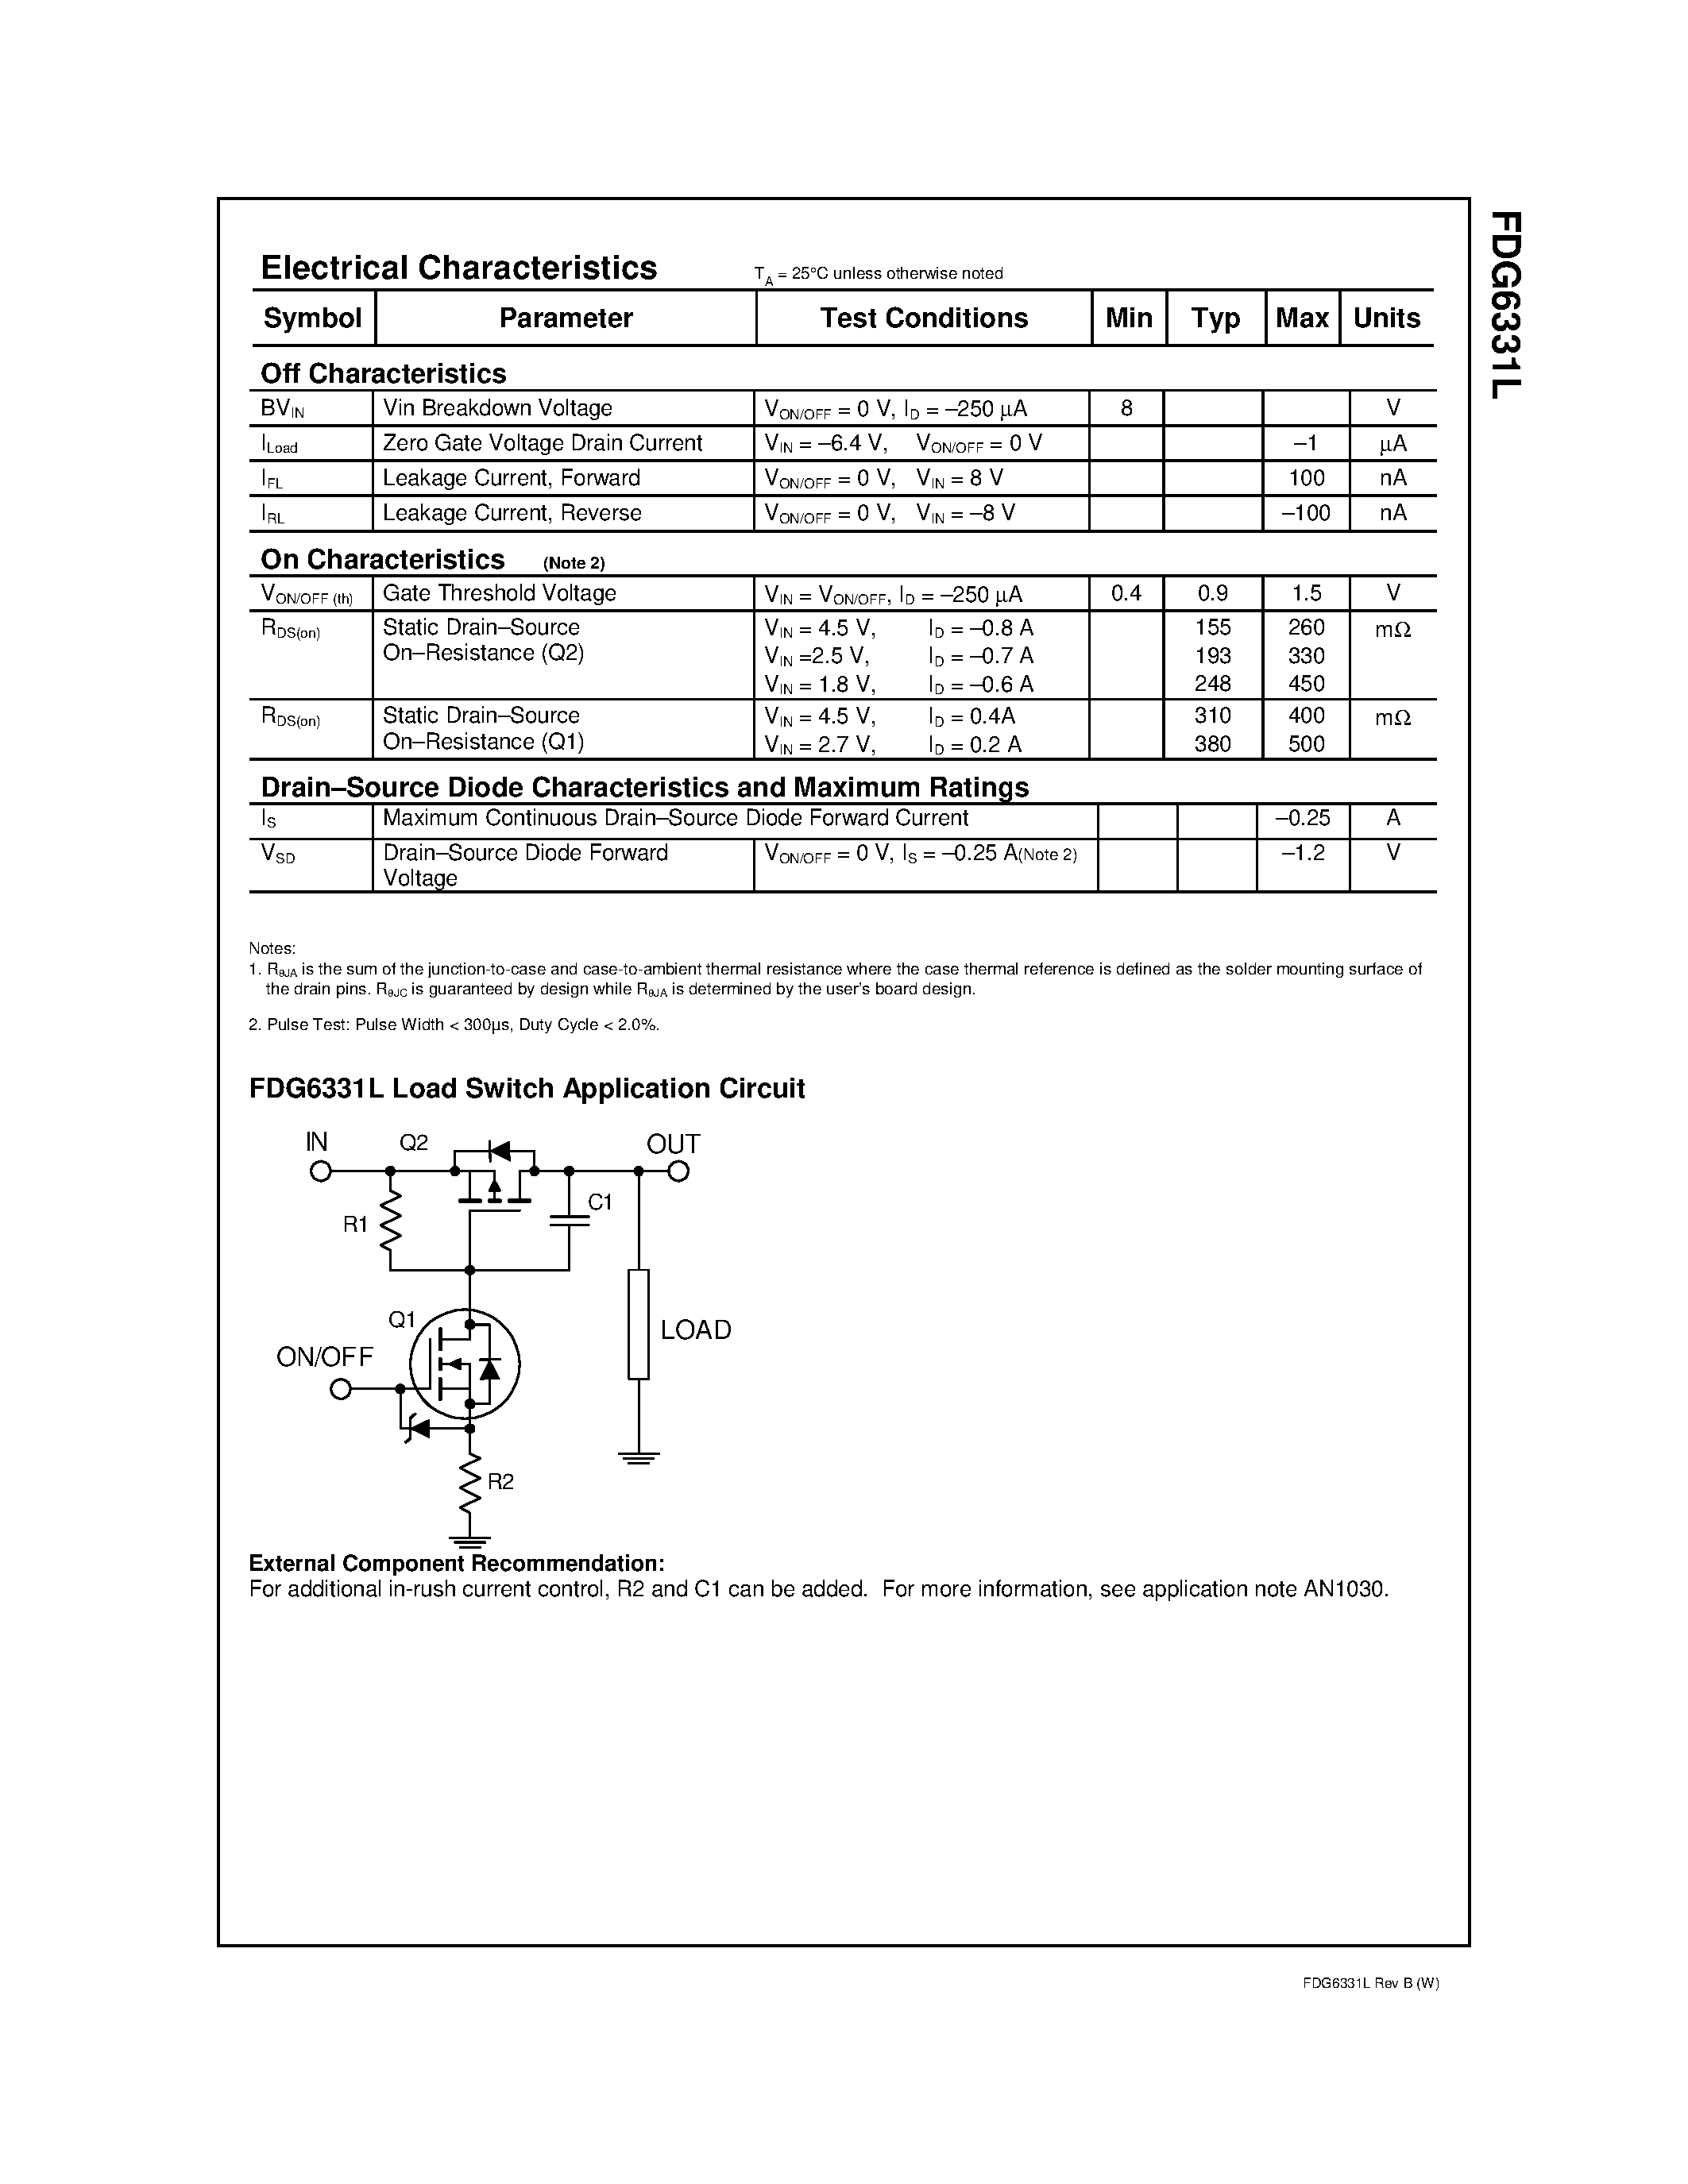 Datasheet FDG6331L - Integrated Load Switch page 2